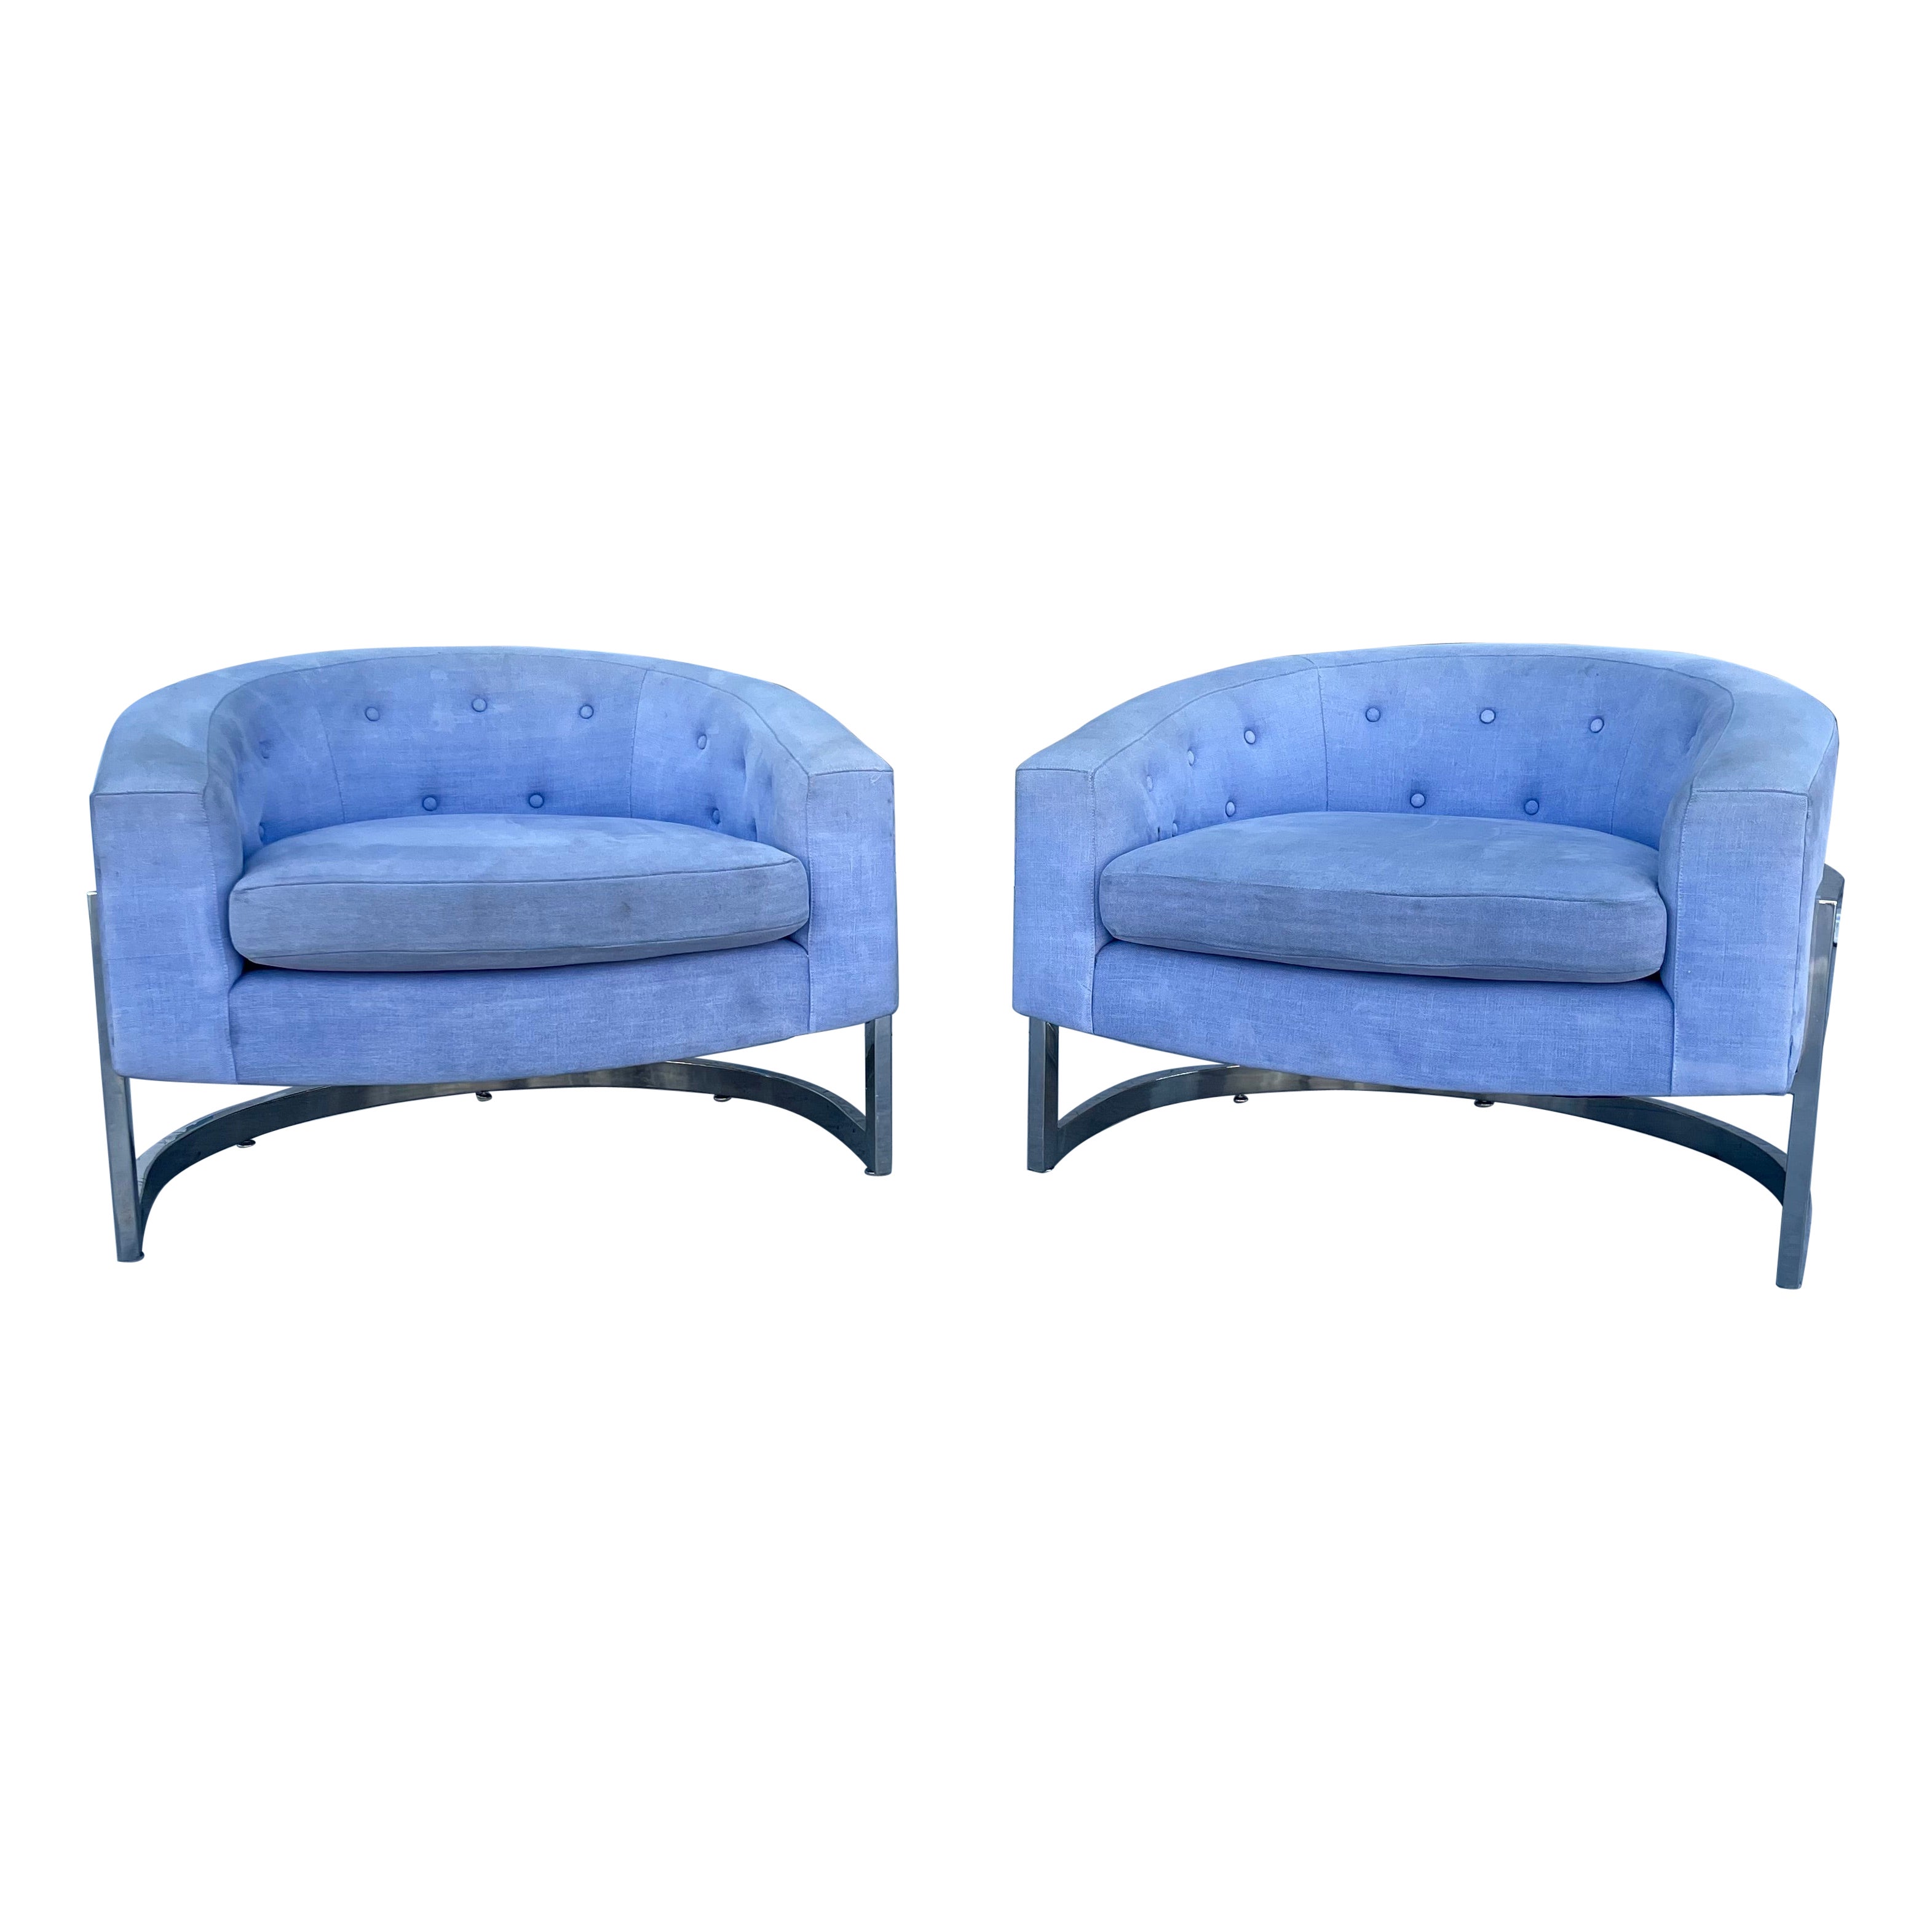 1970s Mid Century Lounge Chairs Styled After Milo Baughman - a Pair